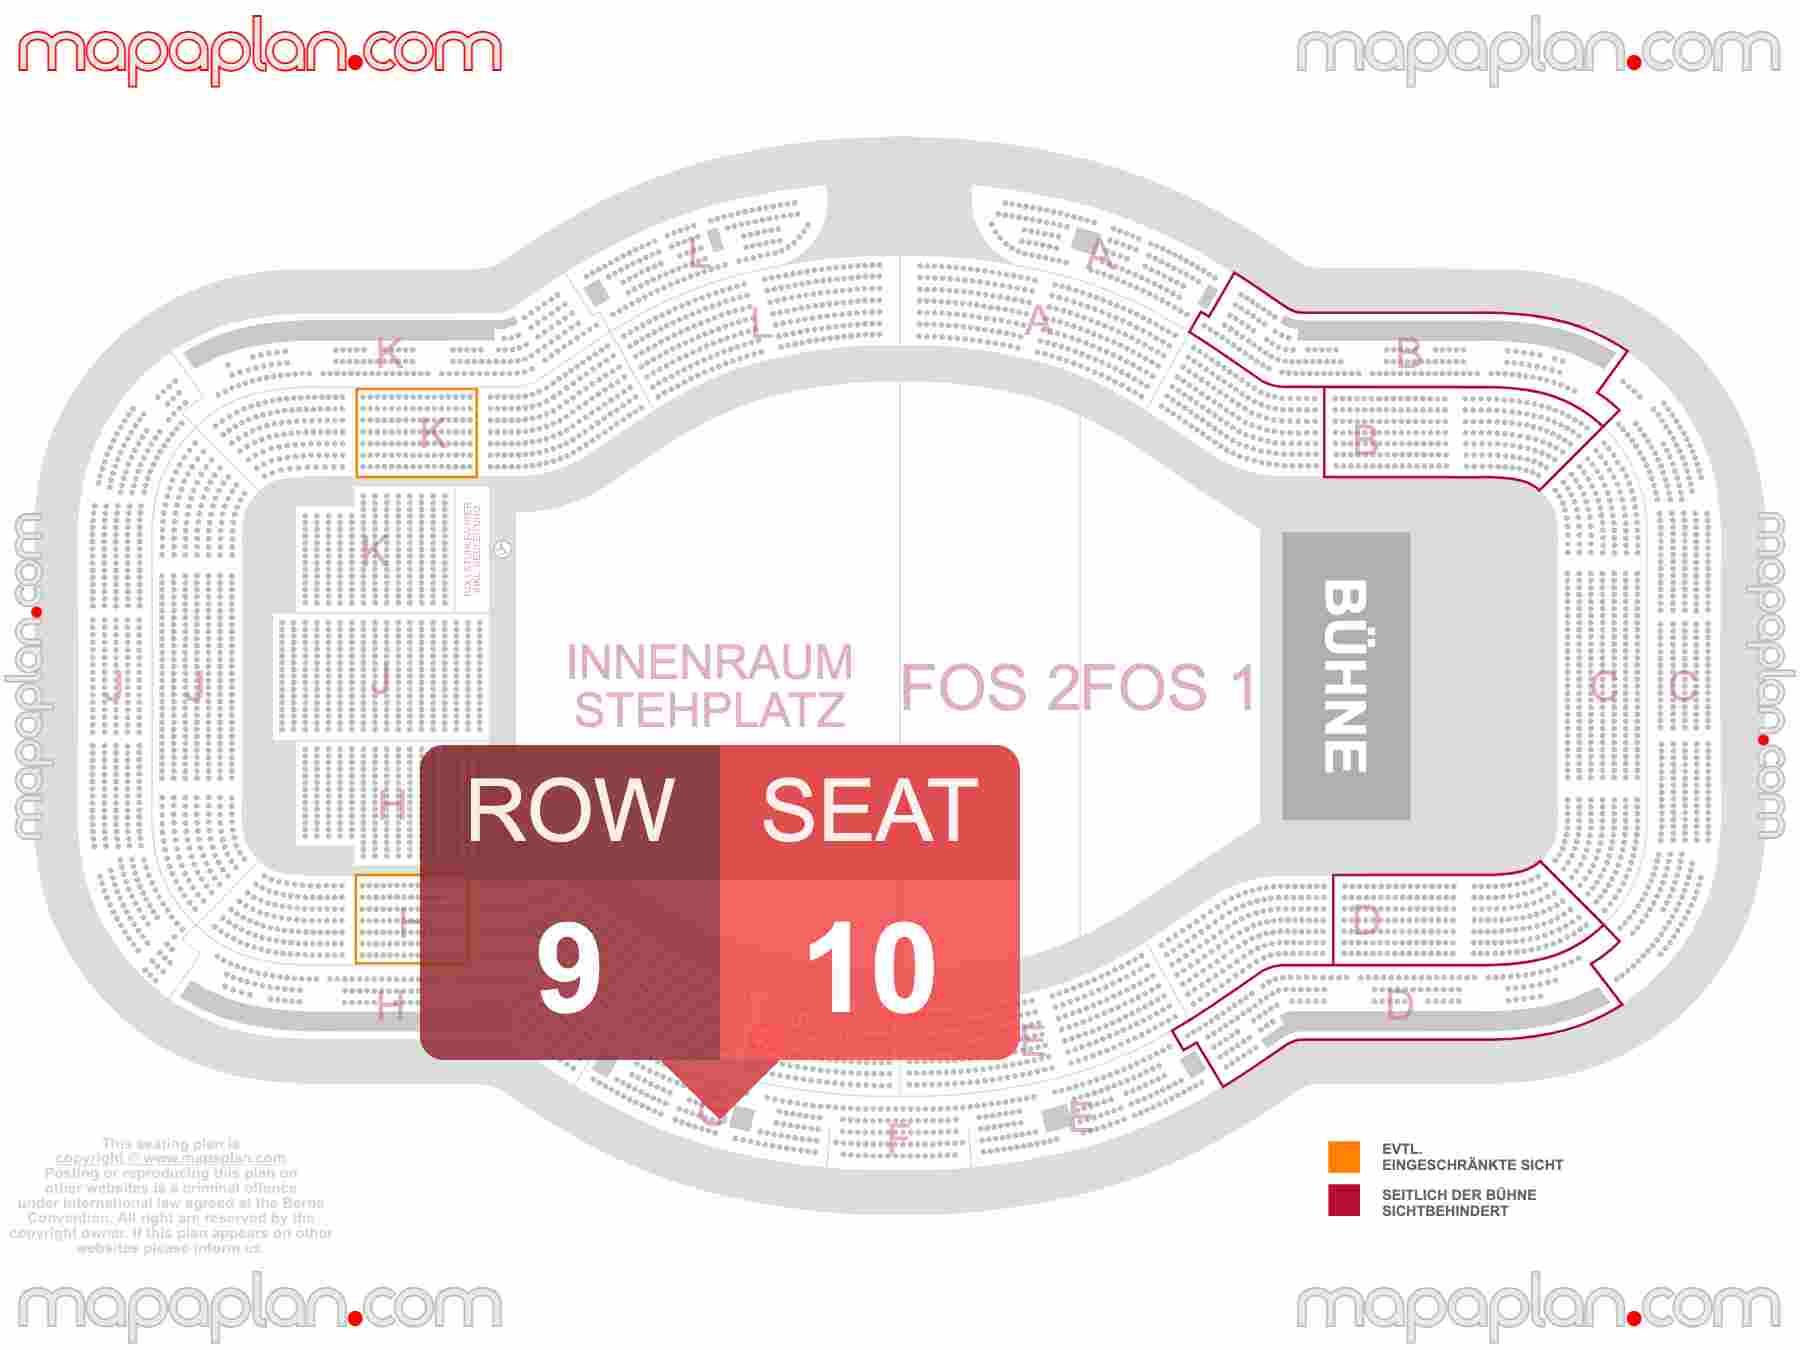 Frankfurt am Main Festhalle seating plan Concert with floor general admission standing room only Innenraum Steh- & Sitzplätze seating plan with exact section numbers showing best rows and seats selection 3d layout - Best interactive seat finder tool with precise detailed location data